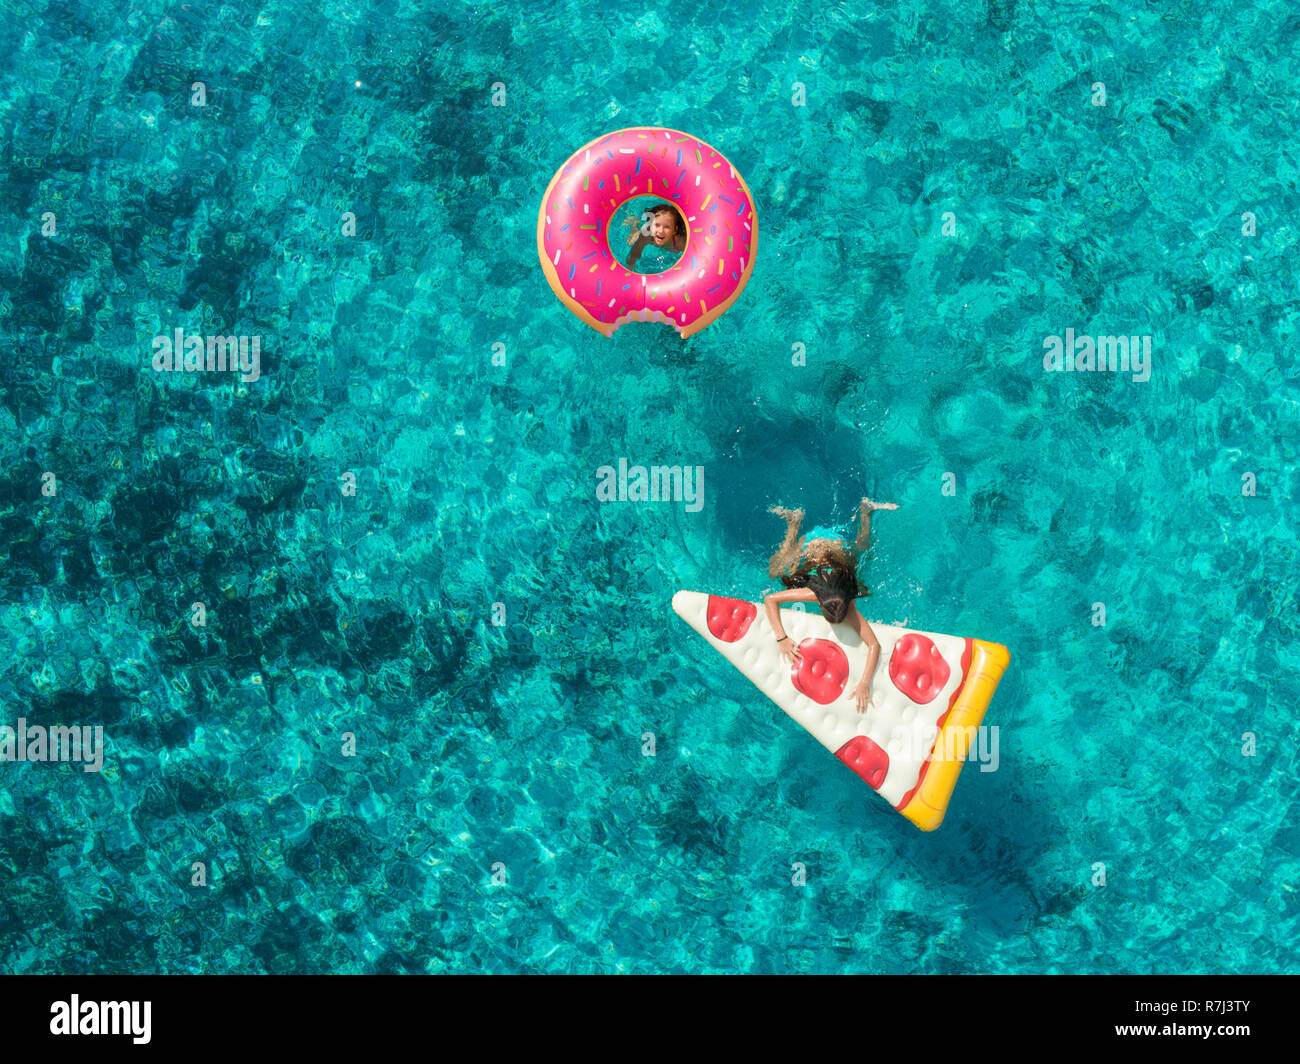 Aerial view of two young girls playing in sea one on pizza, other looking through donut shaped inflatable, smiling. Stock Photo